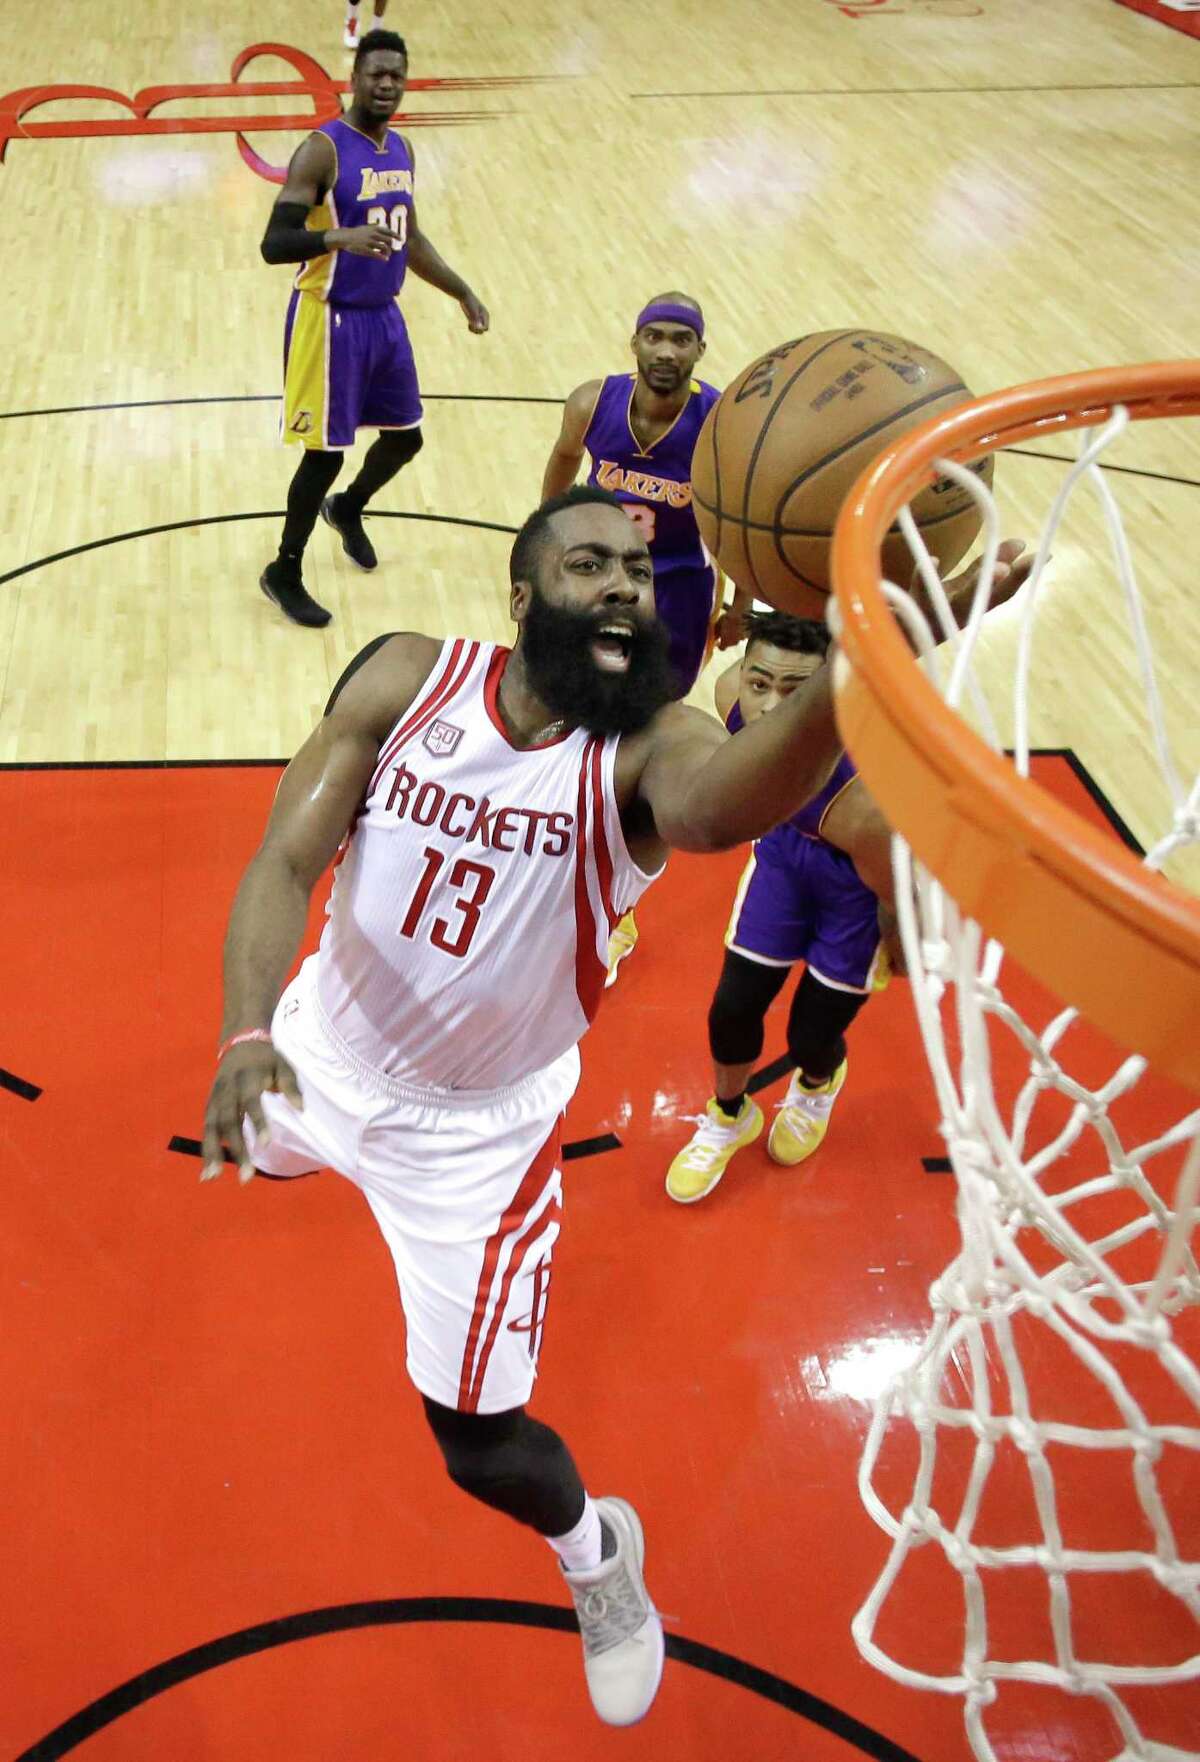 Houston Rockets' James Harden (13) goes up for a shot against the Los Angeles Lakers during the first half of an NBA basketball game Wednesday, March 15, 2017, in Houston. (AP Photo/David J. Phillip)